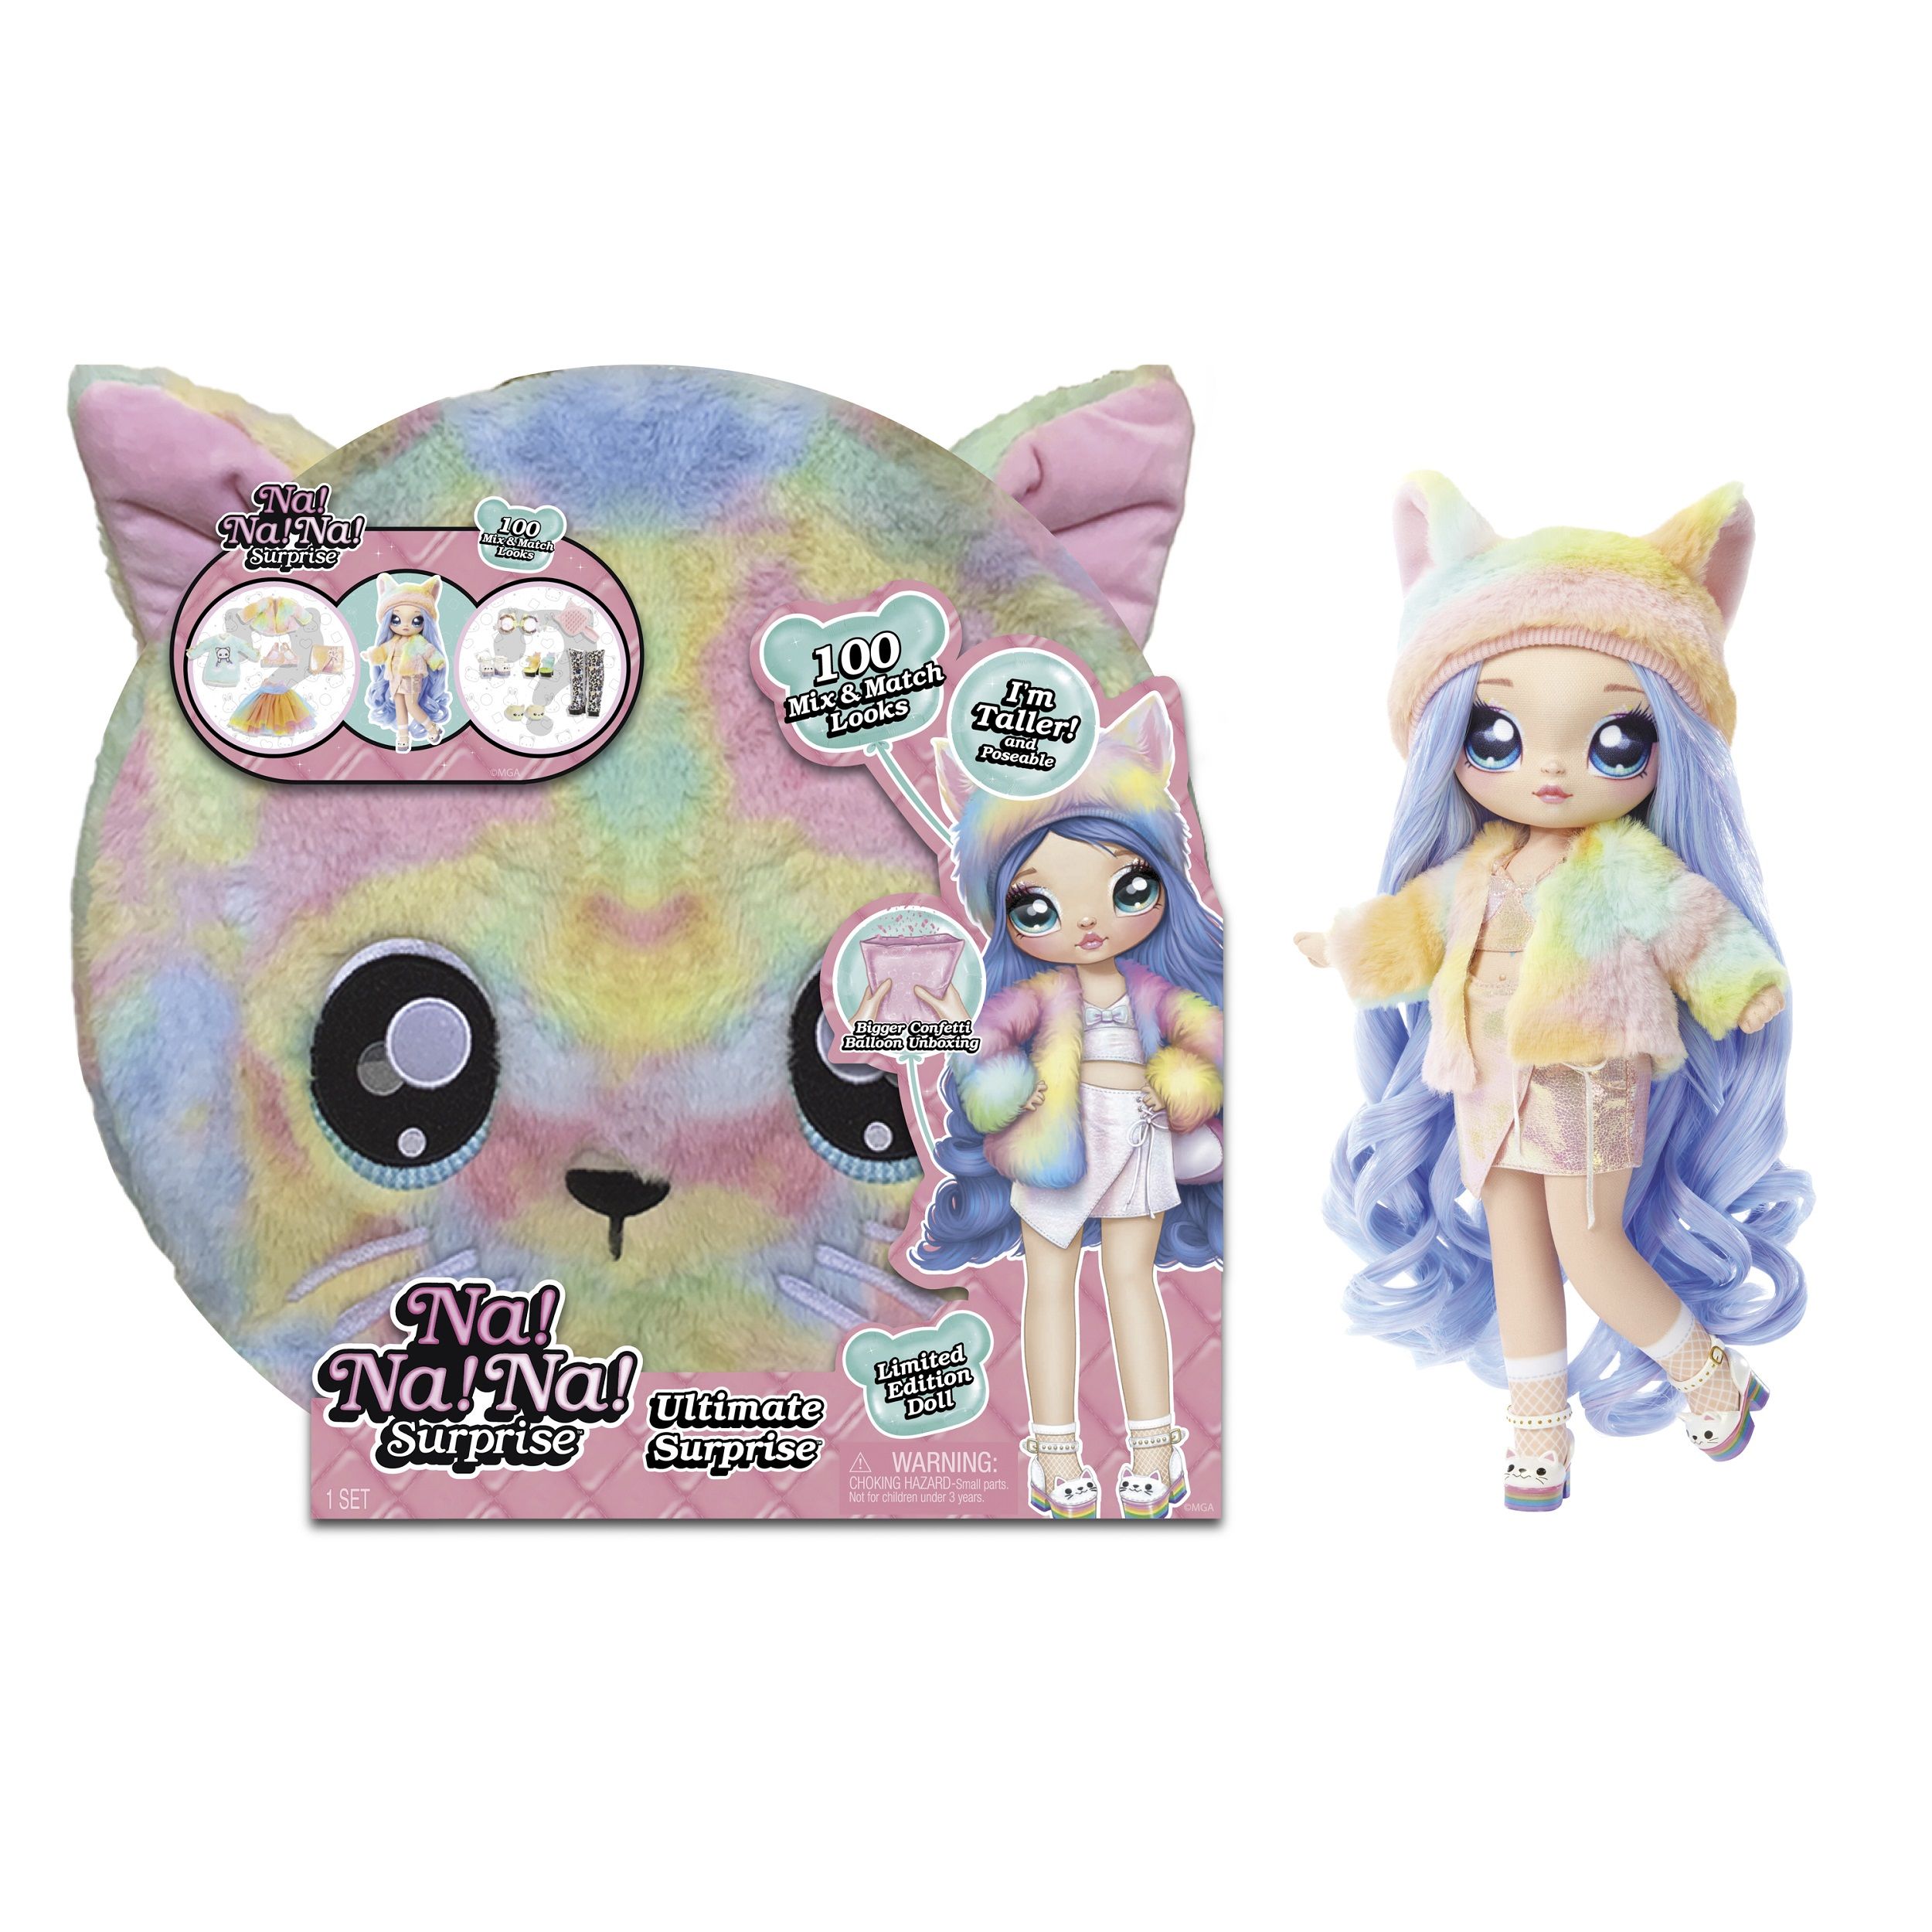 Na! Na! Na! Surprise Ultimate Surprise Rainbow Kitty with New Taller Doll and Mix & Match Looks